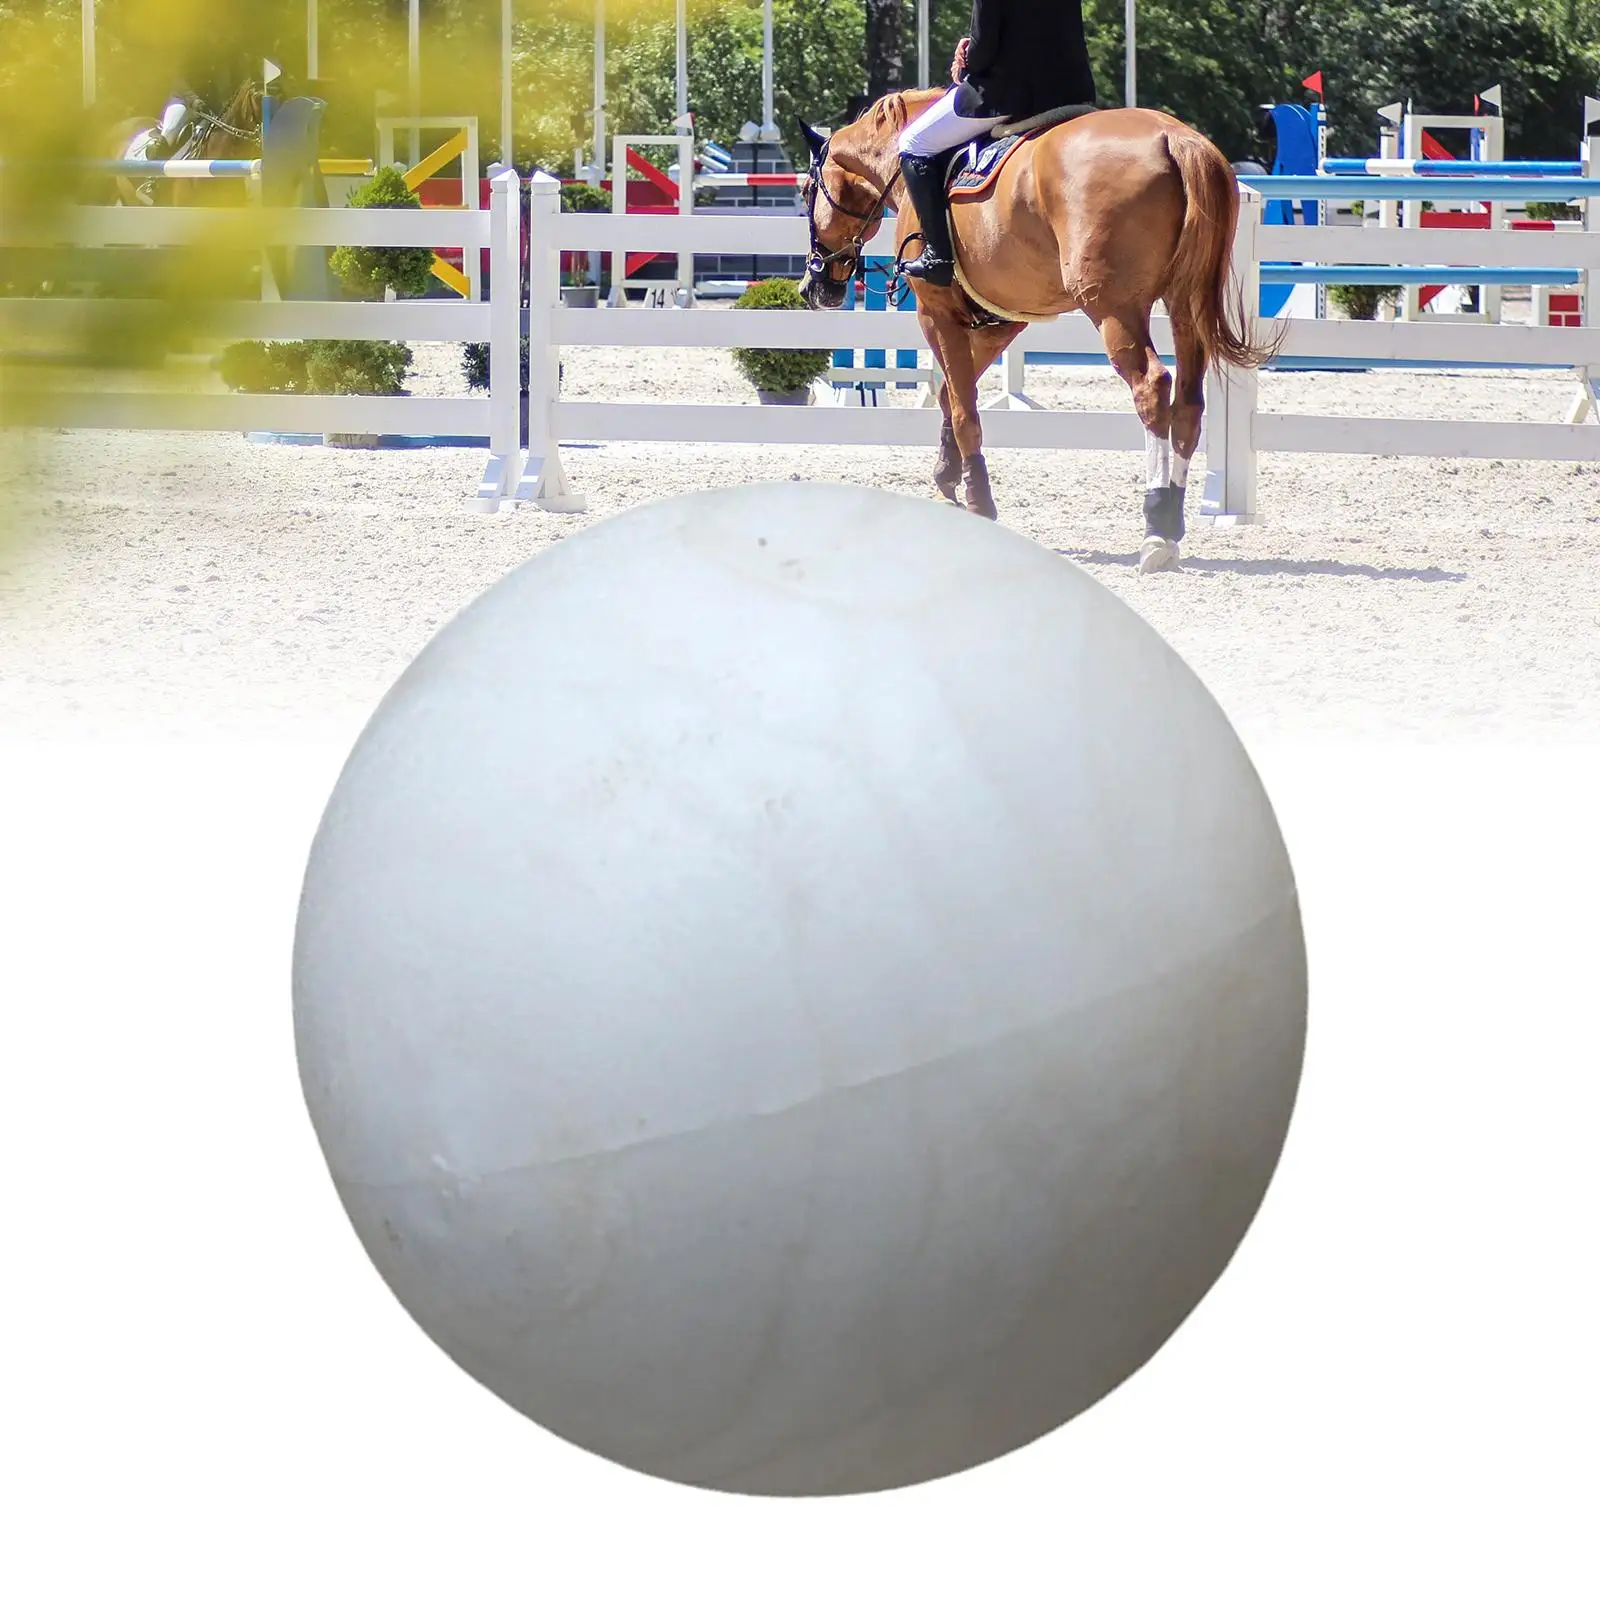 Toss Jolly Play Ball Wear Resistant Lightweight PC for Horse Play Tugging Goats